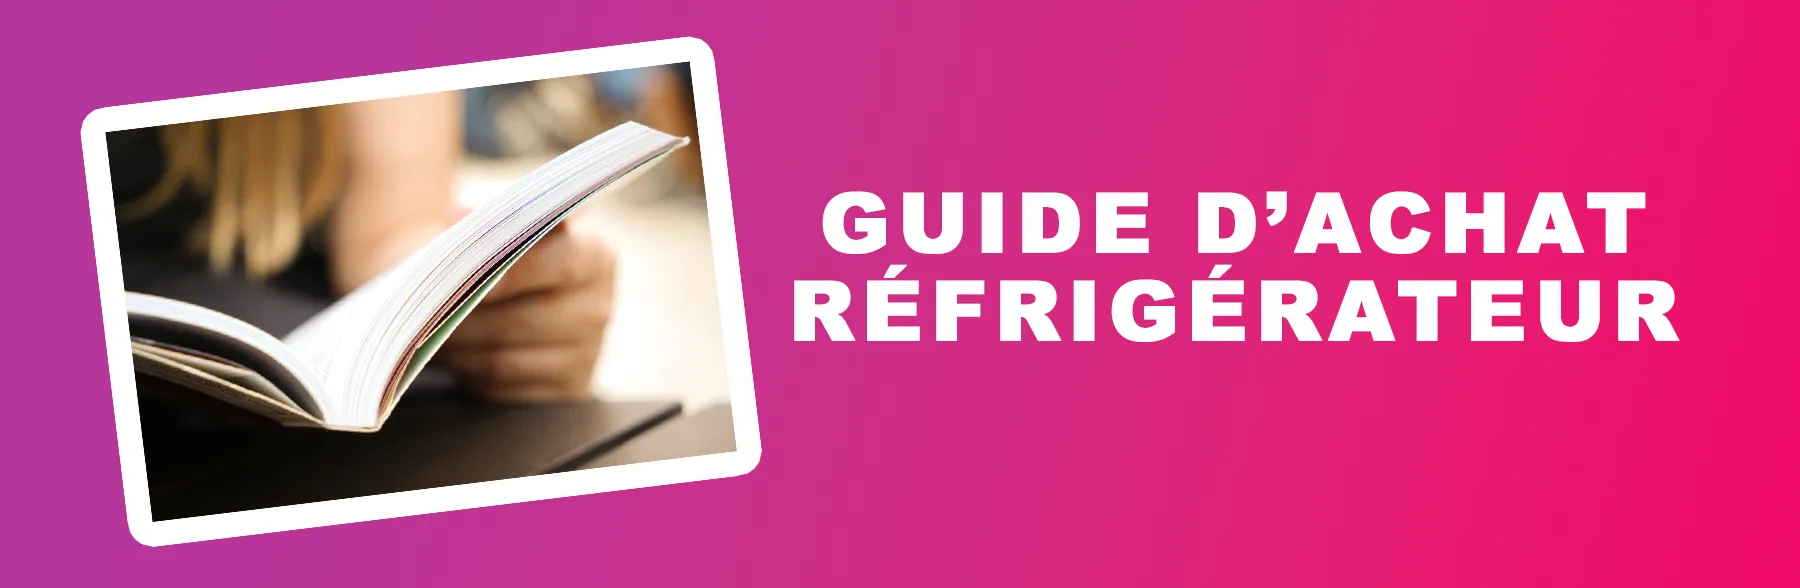 Guide-Dachat-Refrigerateur